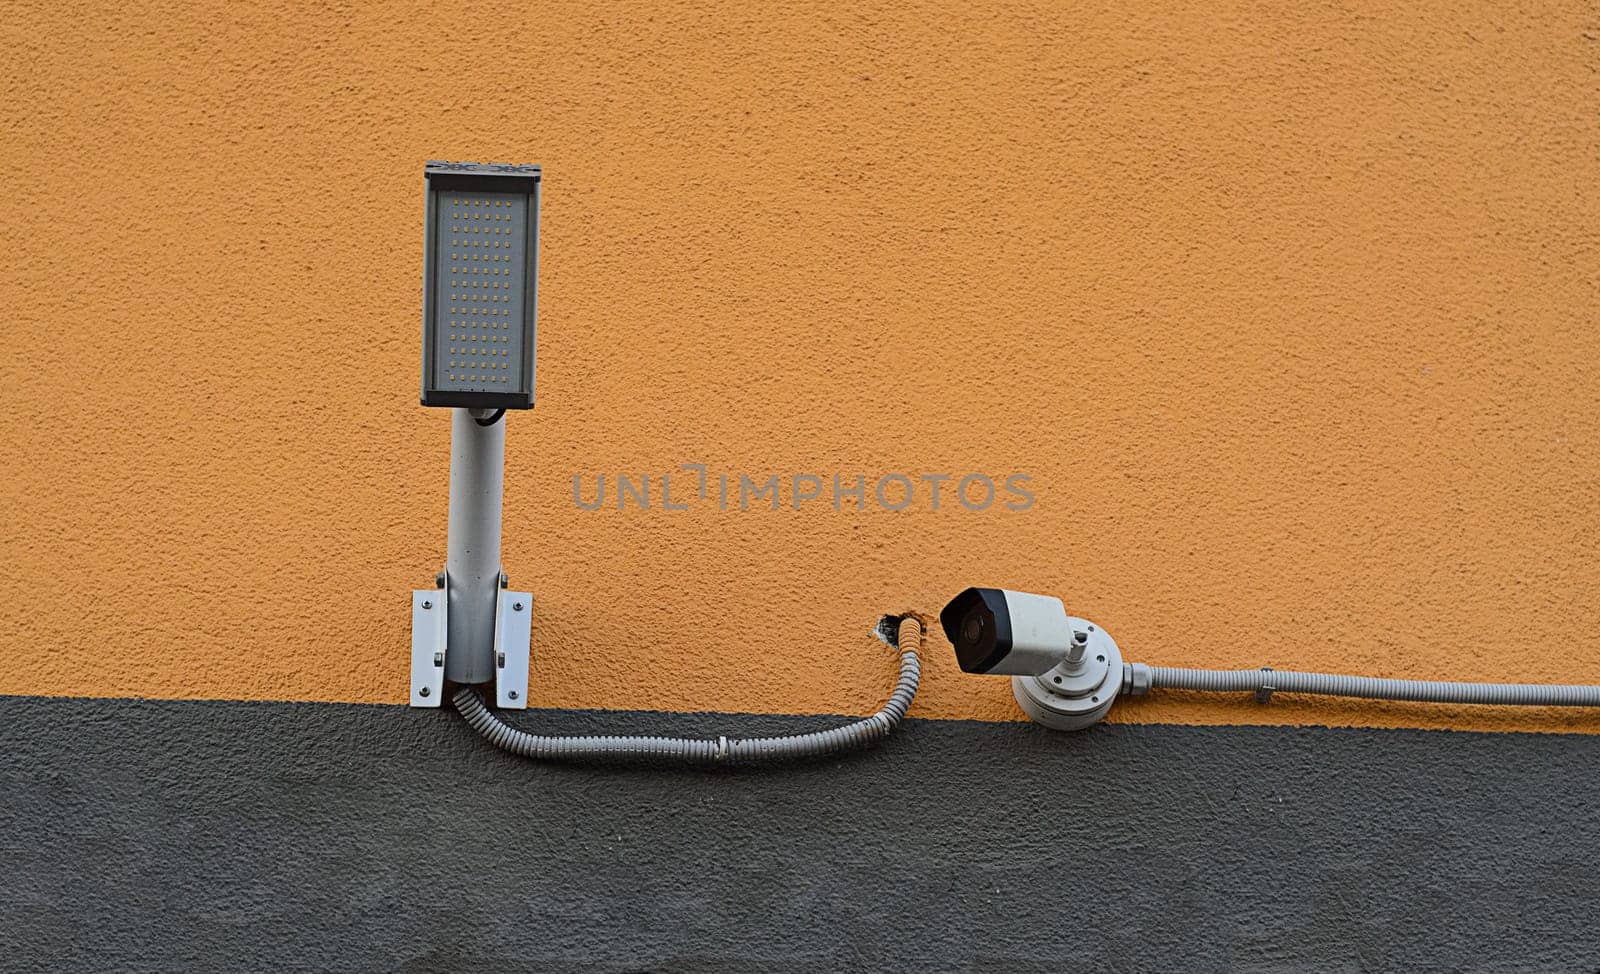 camera for security with lamp on house wall.